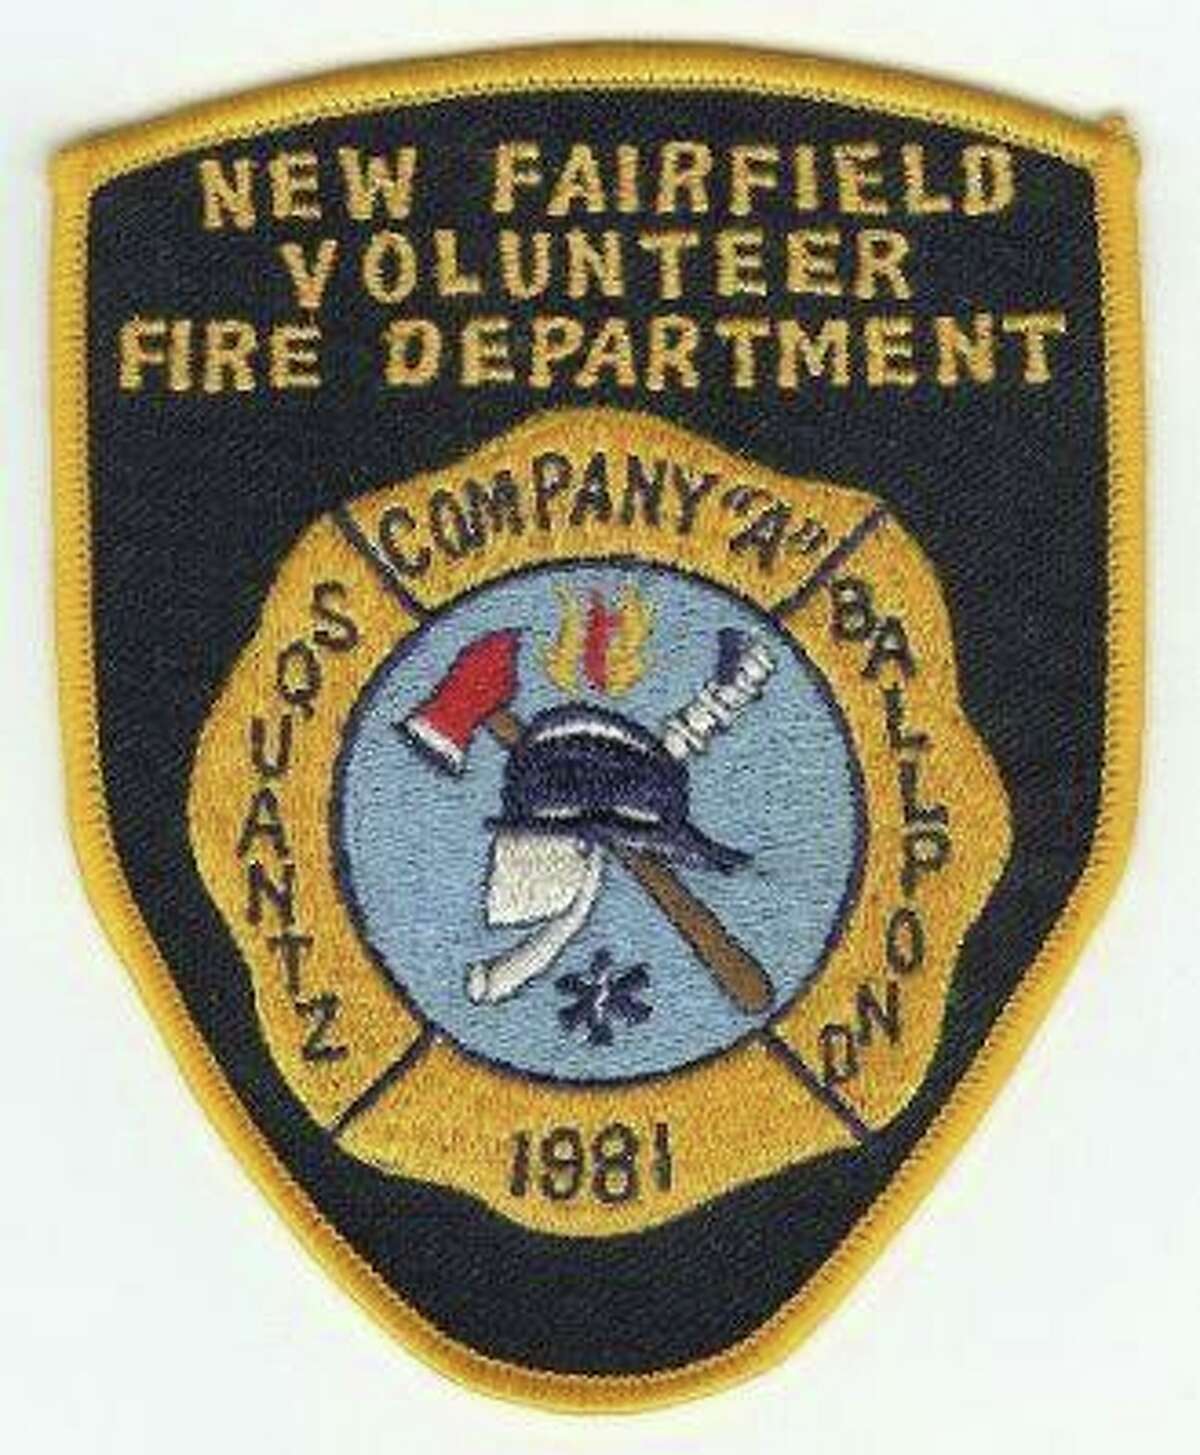 The New Fairfield Volunteer Fire Department was recently awarded a $11,563 federal grant, which it plans to use to purchase COVID-related equipment and supplies.